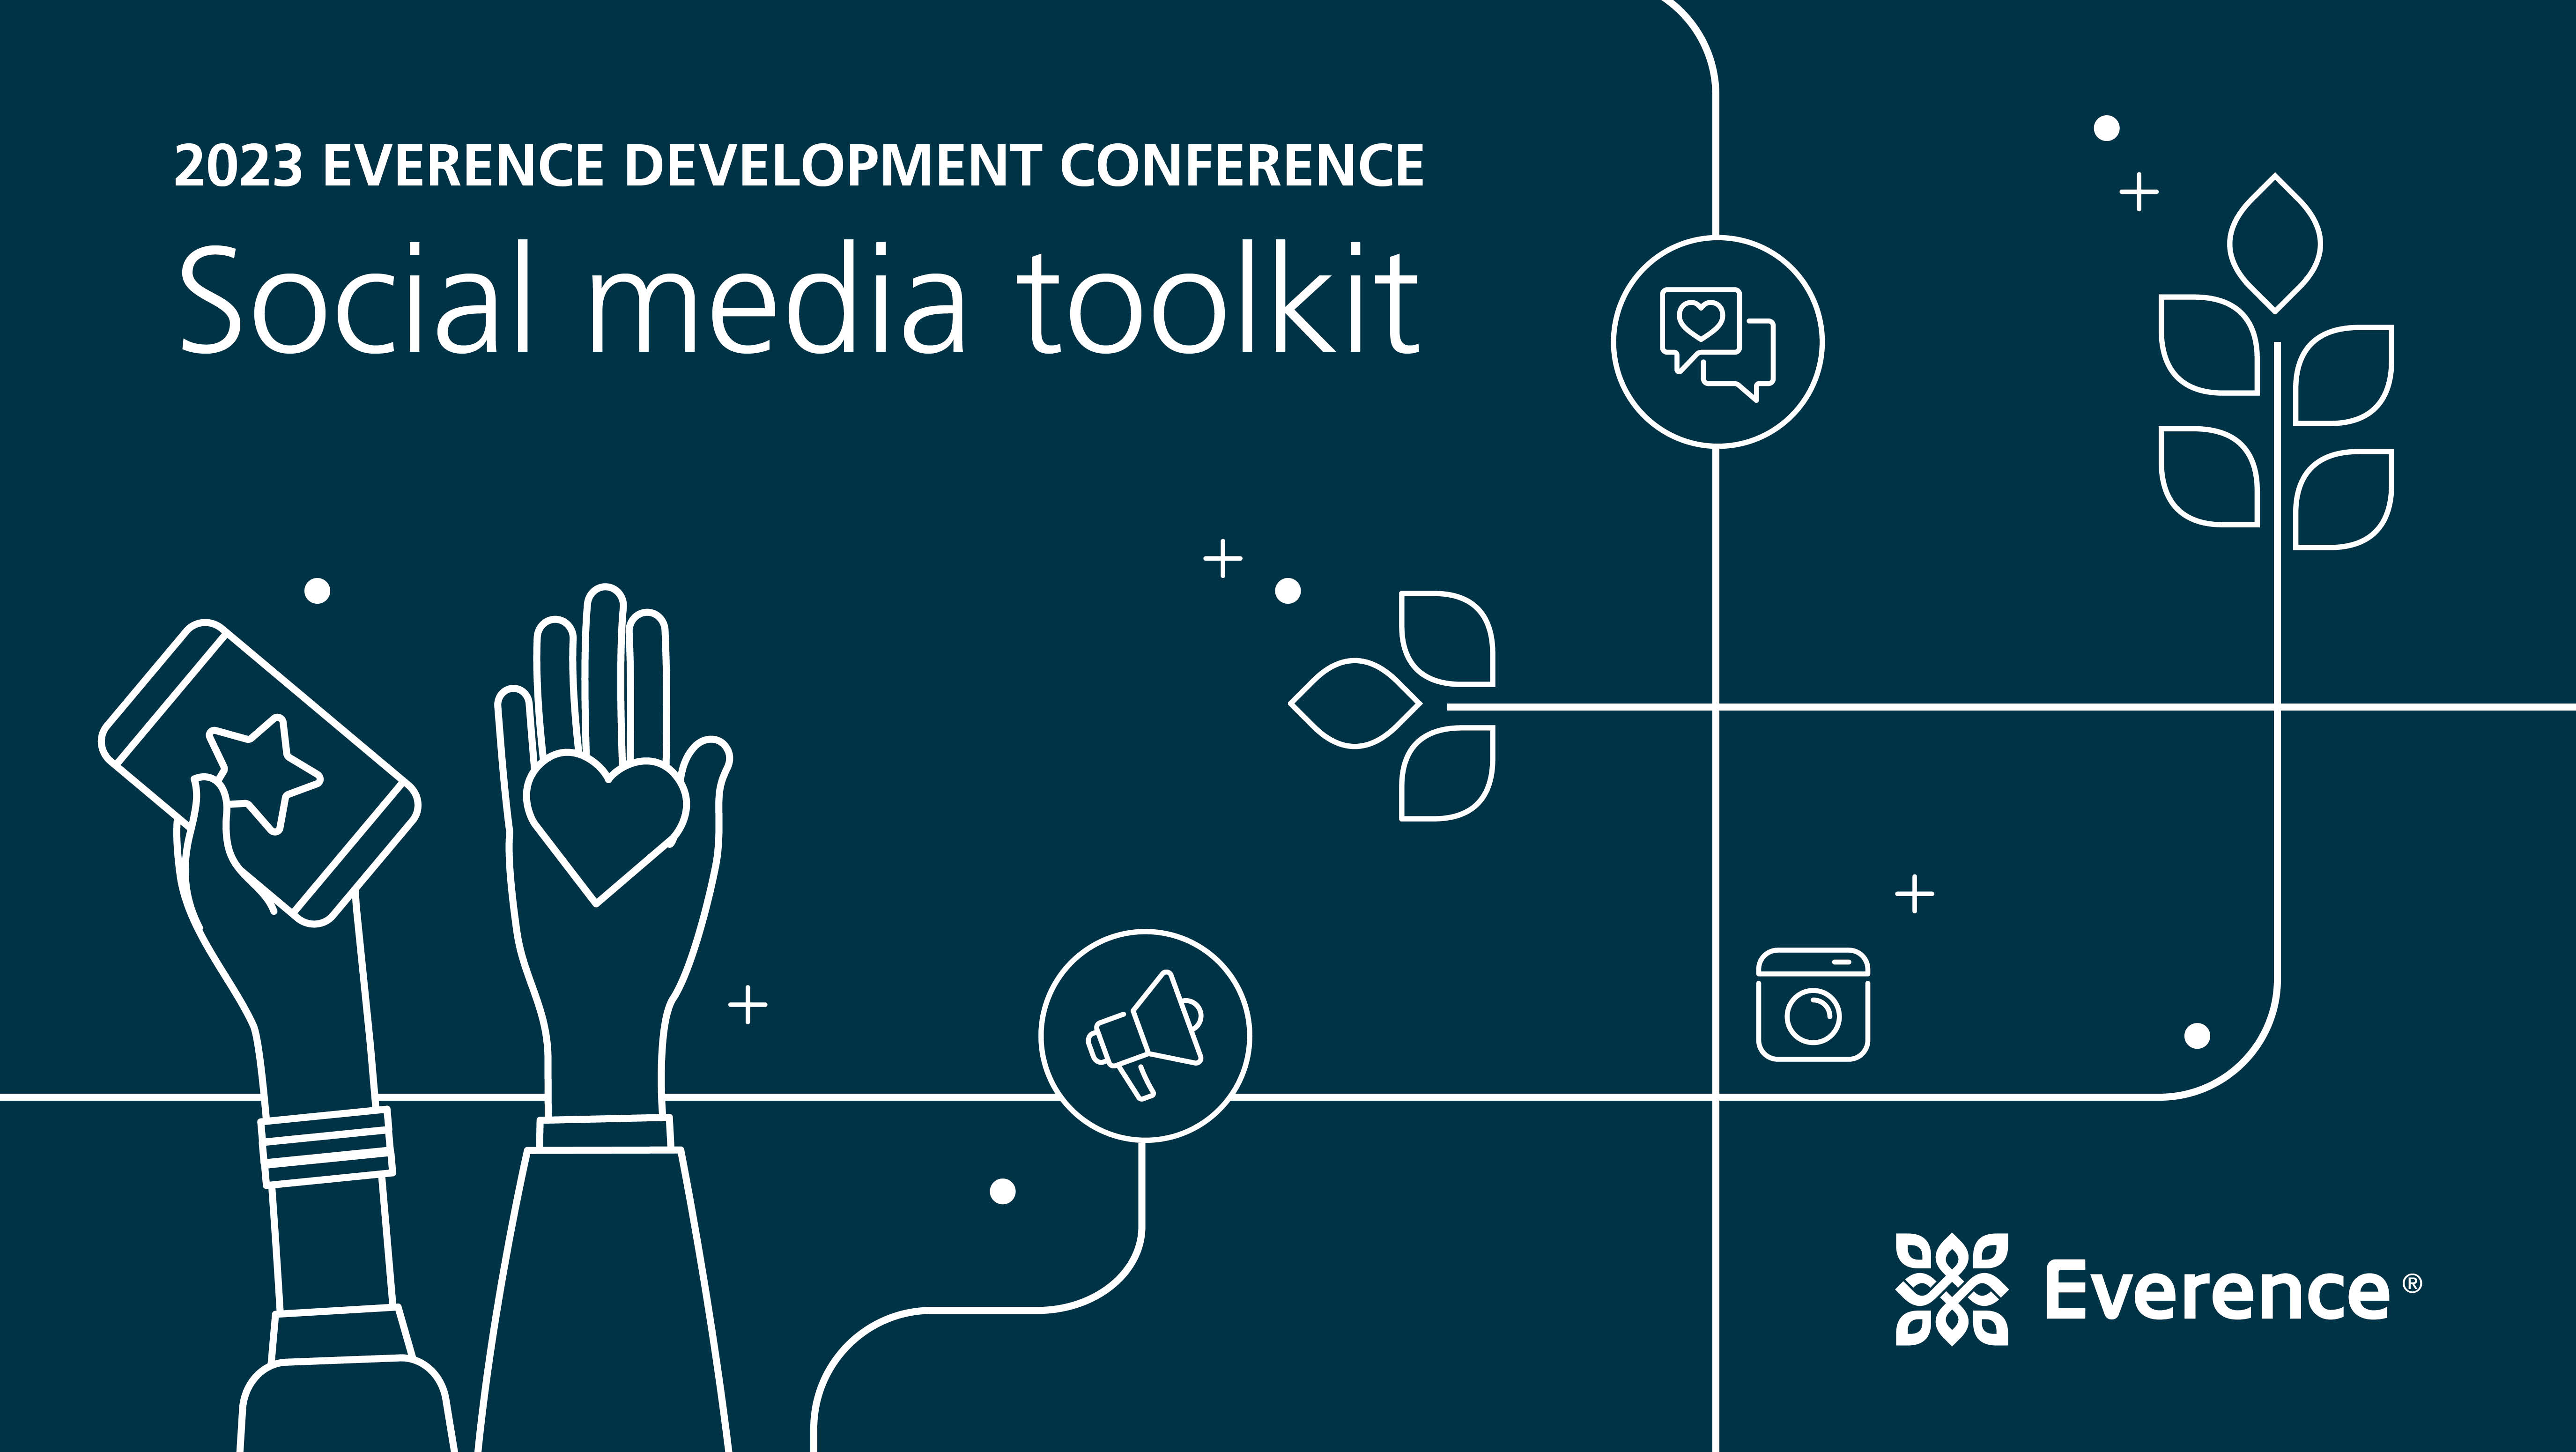 2023 Everence Development Conference social media toolkit graphic